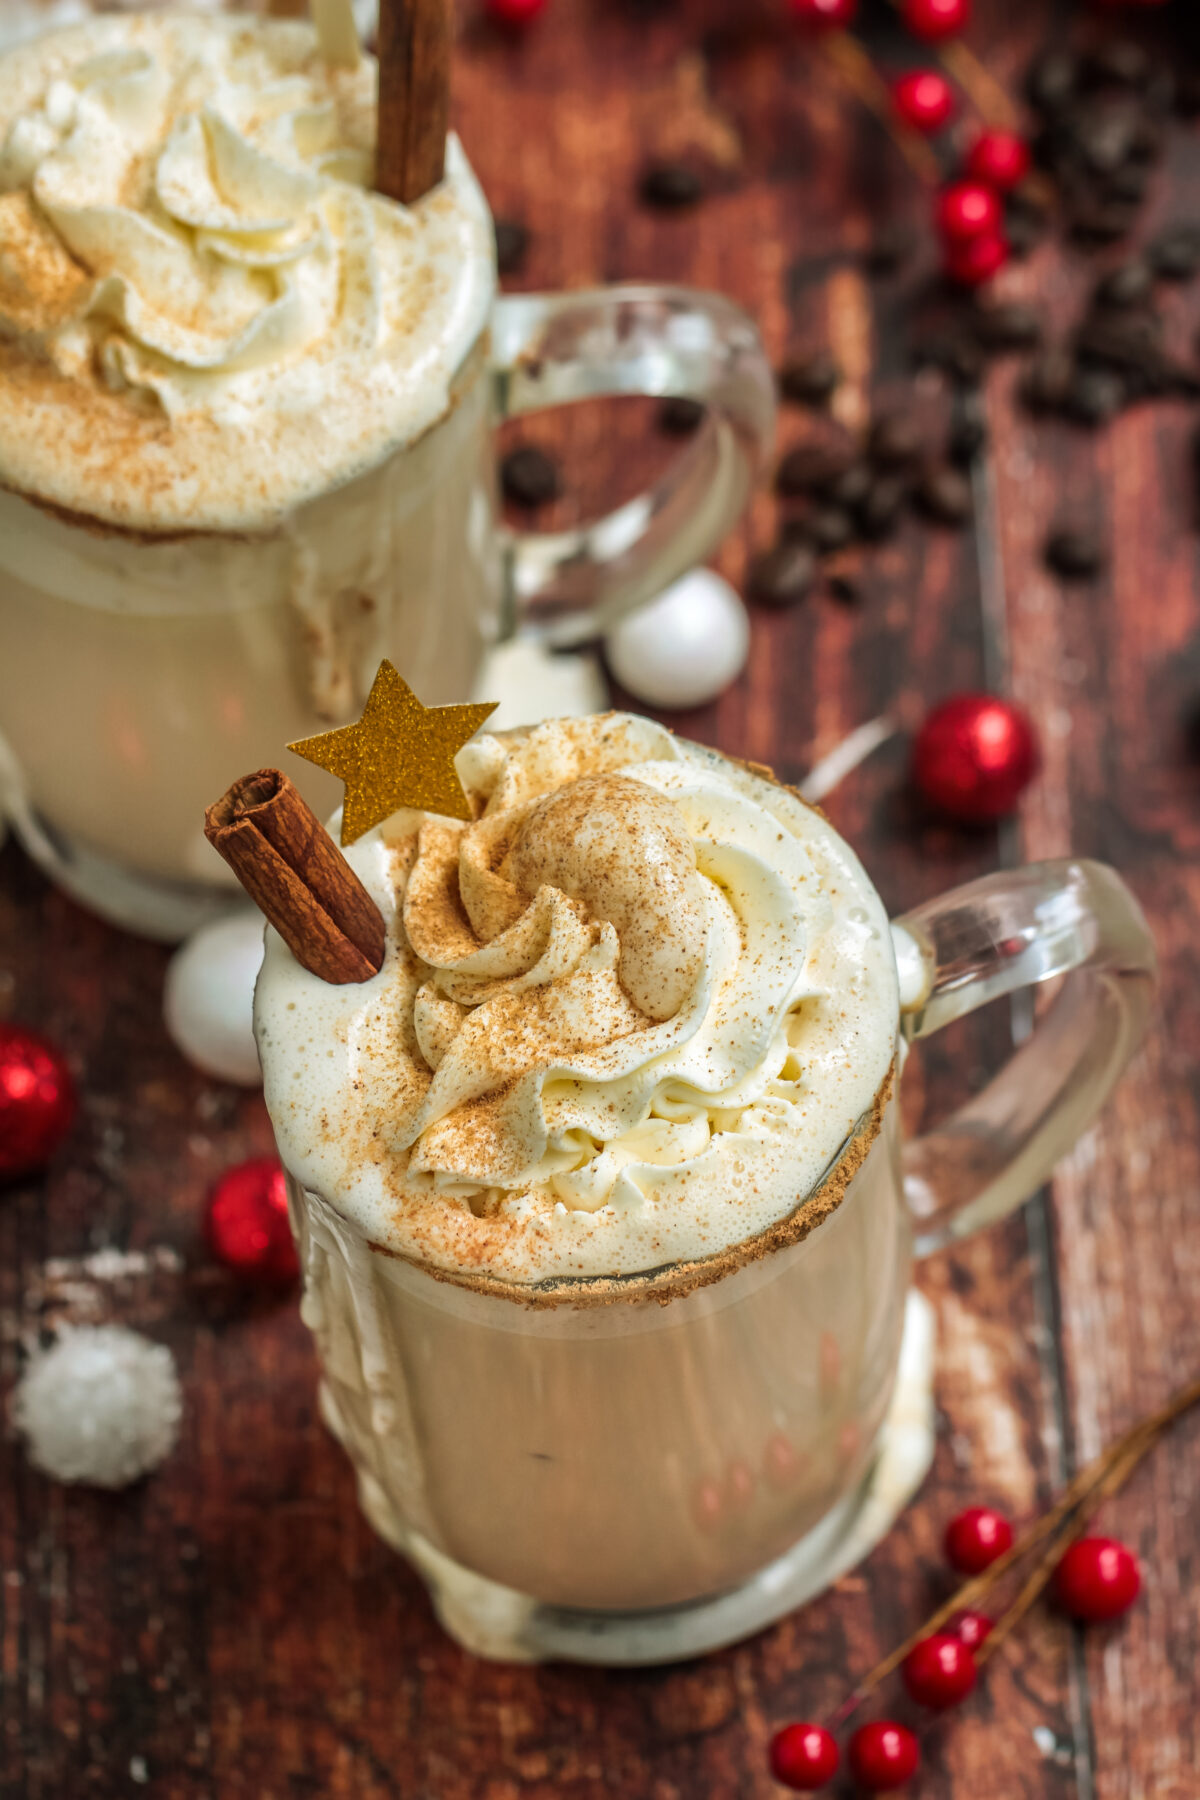 This is the best eggnog latte recipe. Learn how to make your own fresh, homemade version of this yummy holiday drink!